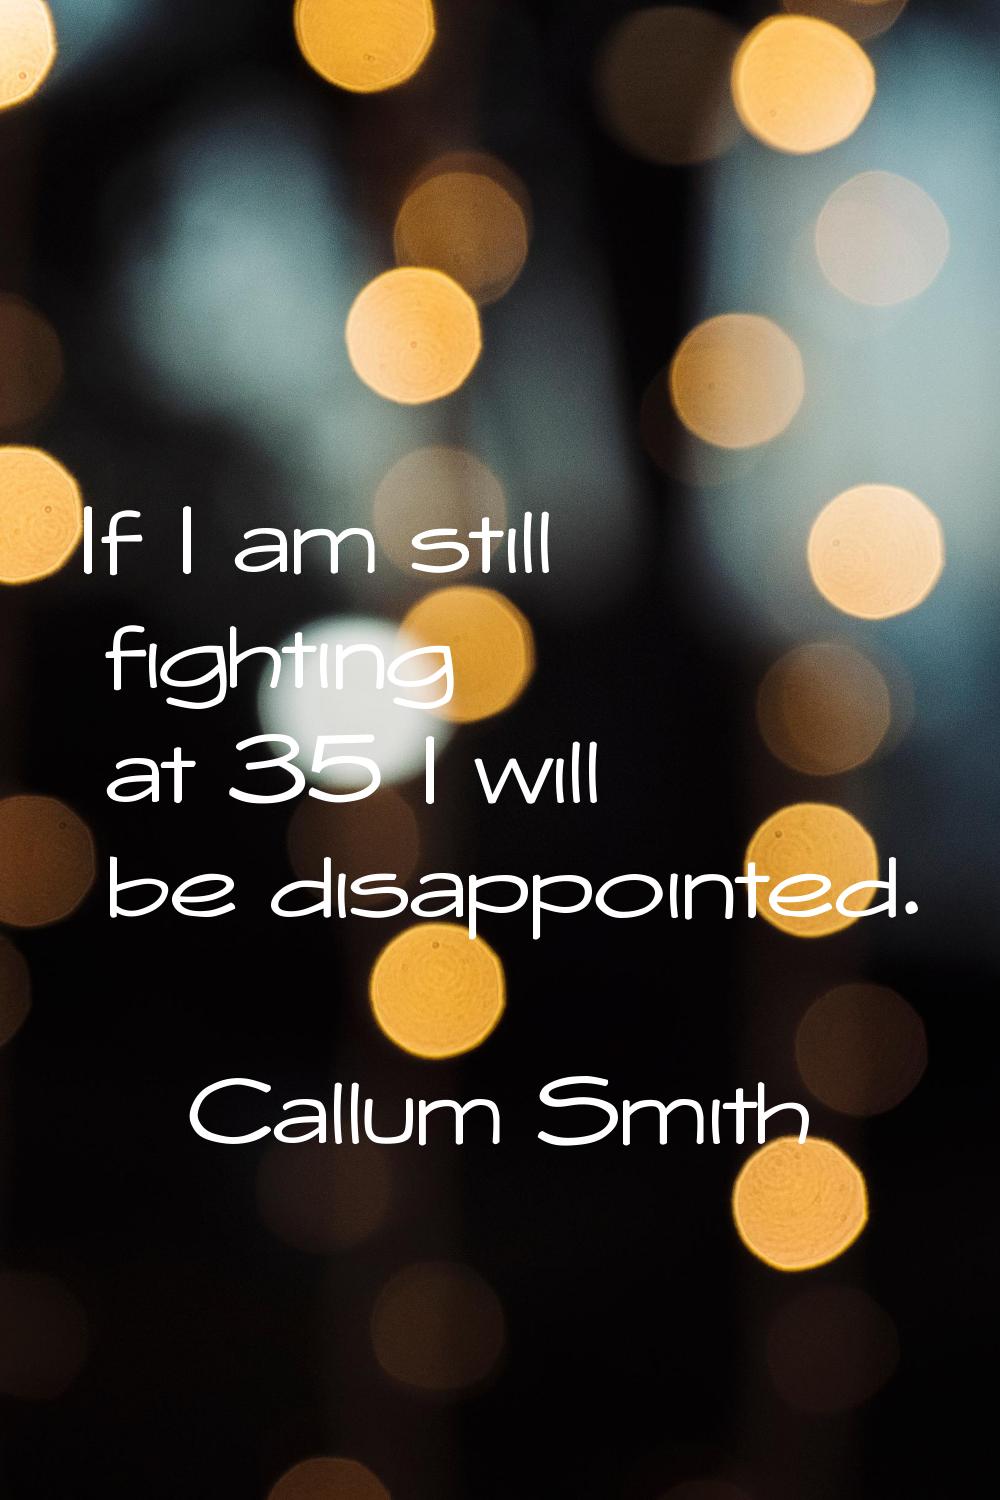 If I am still fighting at 35 I will be disappointed.